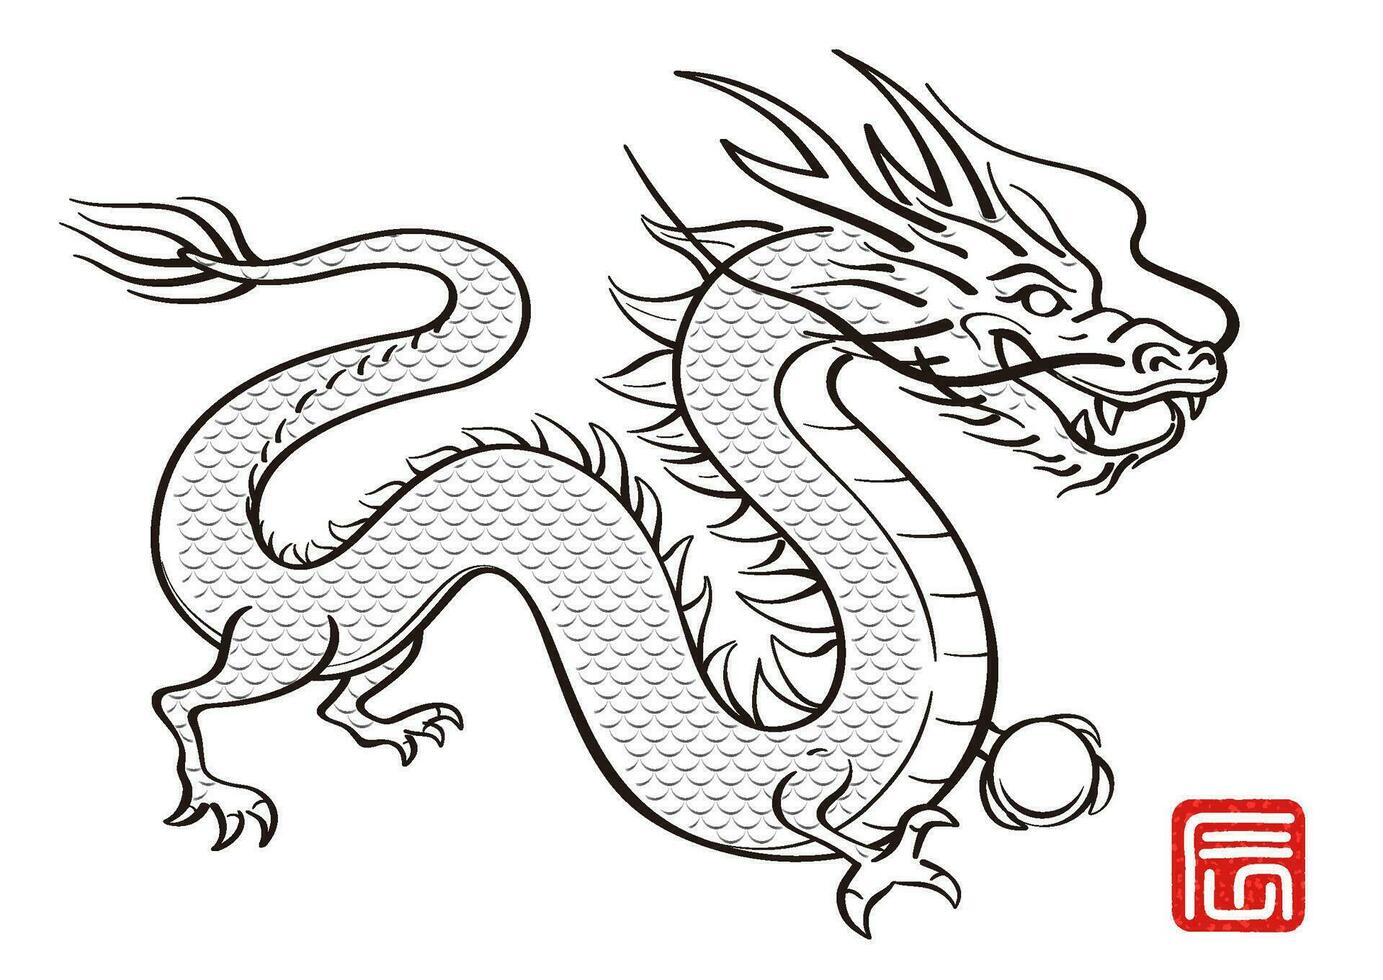 The Year Of The Dragon Vector Zodiac Symbol Illustration Isolated On A White Background.